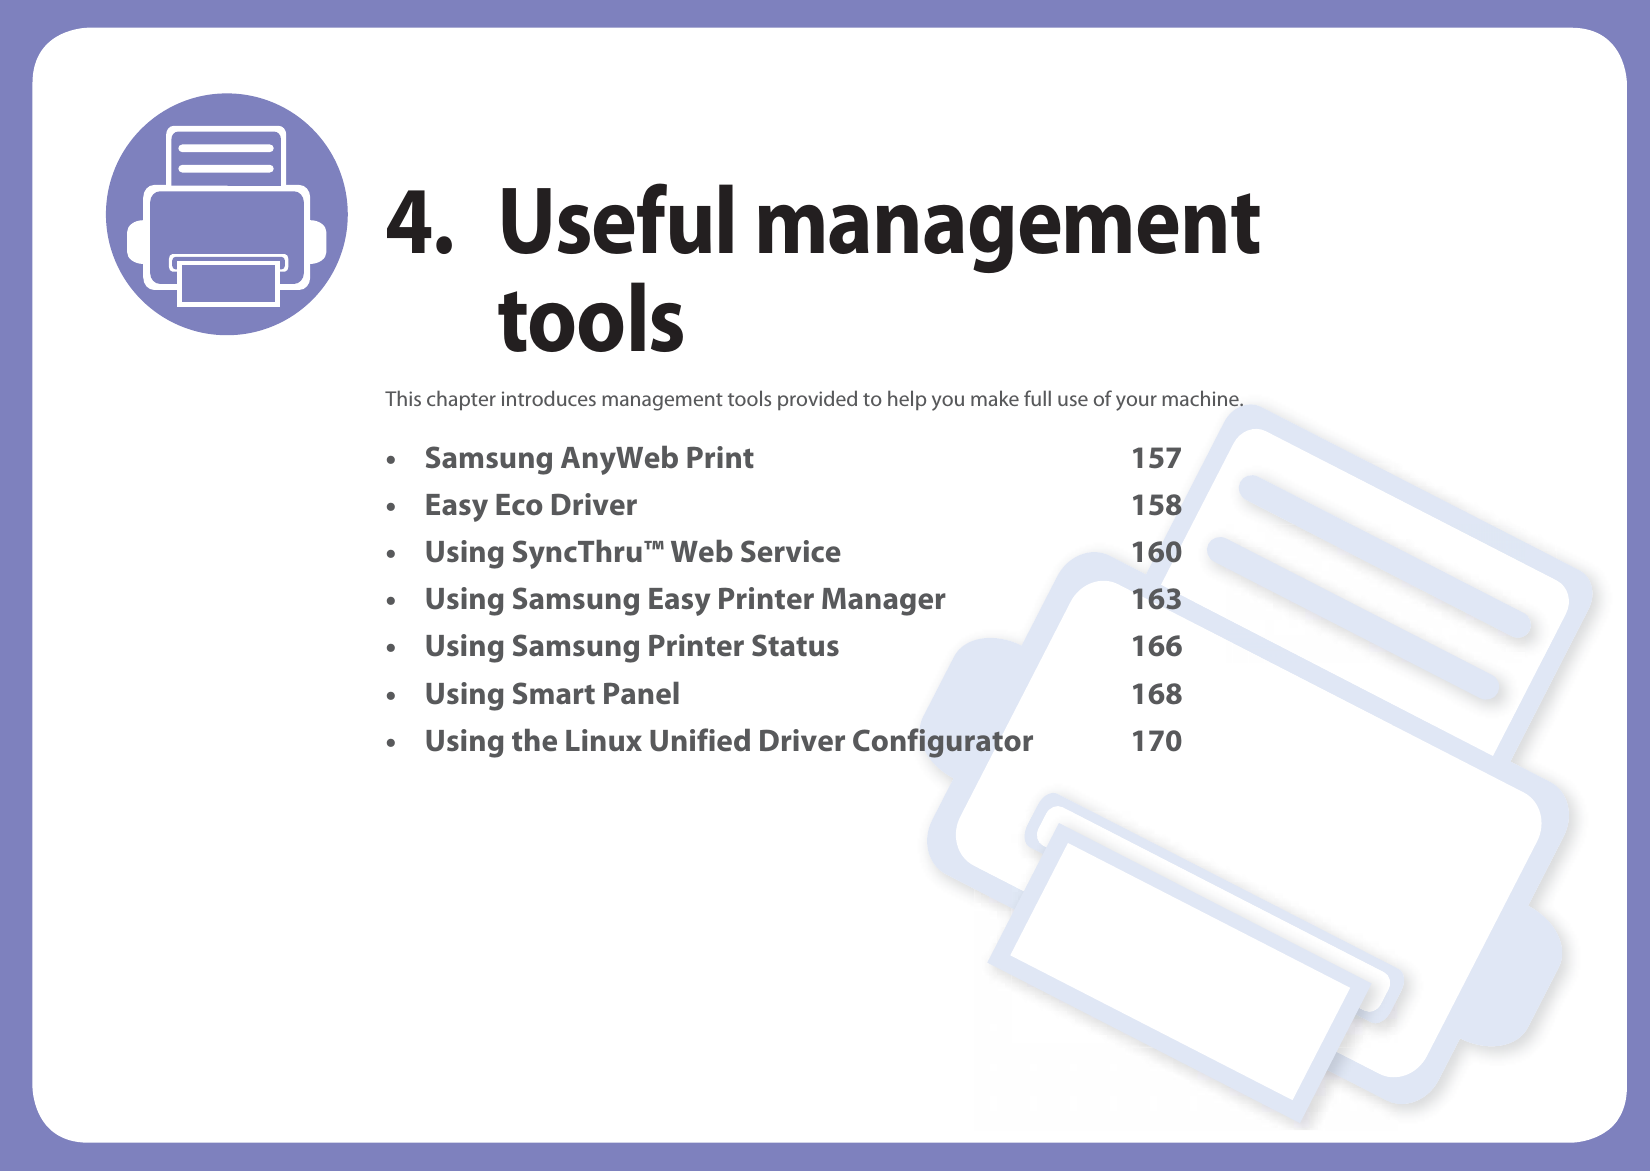 4. Useful management toolsThis chapter introduces management tools provided to help you make full use of your machine. • Samsung AnyWeb Print 157• Easy Eco Driver 158• Using SyncThru™ Web Service 160• Using Samsung Easy Printer Manager 163 • Using Samsung Printer Status 166• Using Smart Panel 168• Using the Linux Unified Driver Configurator 170